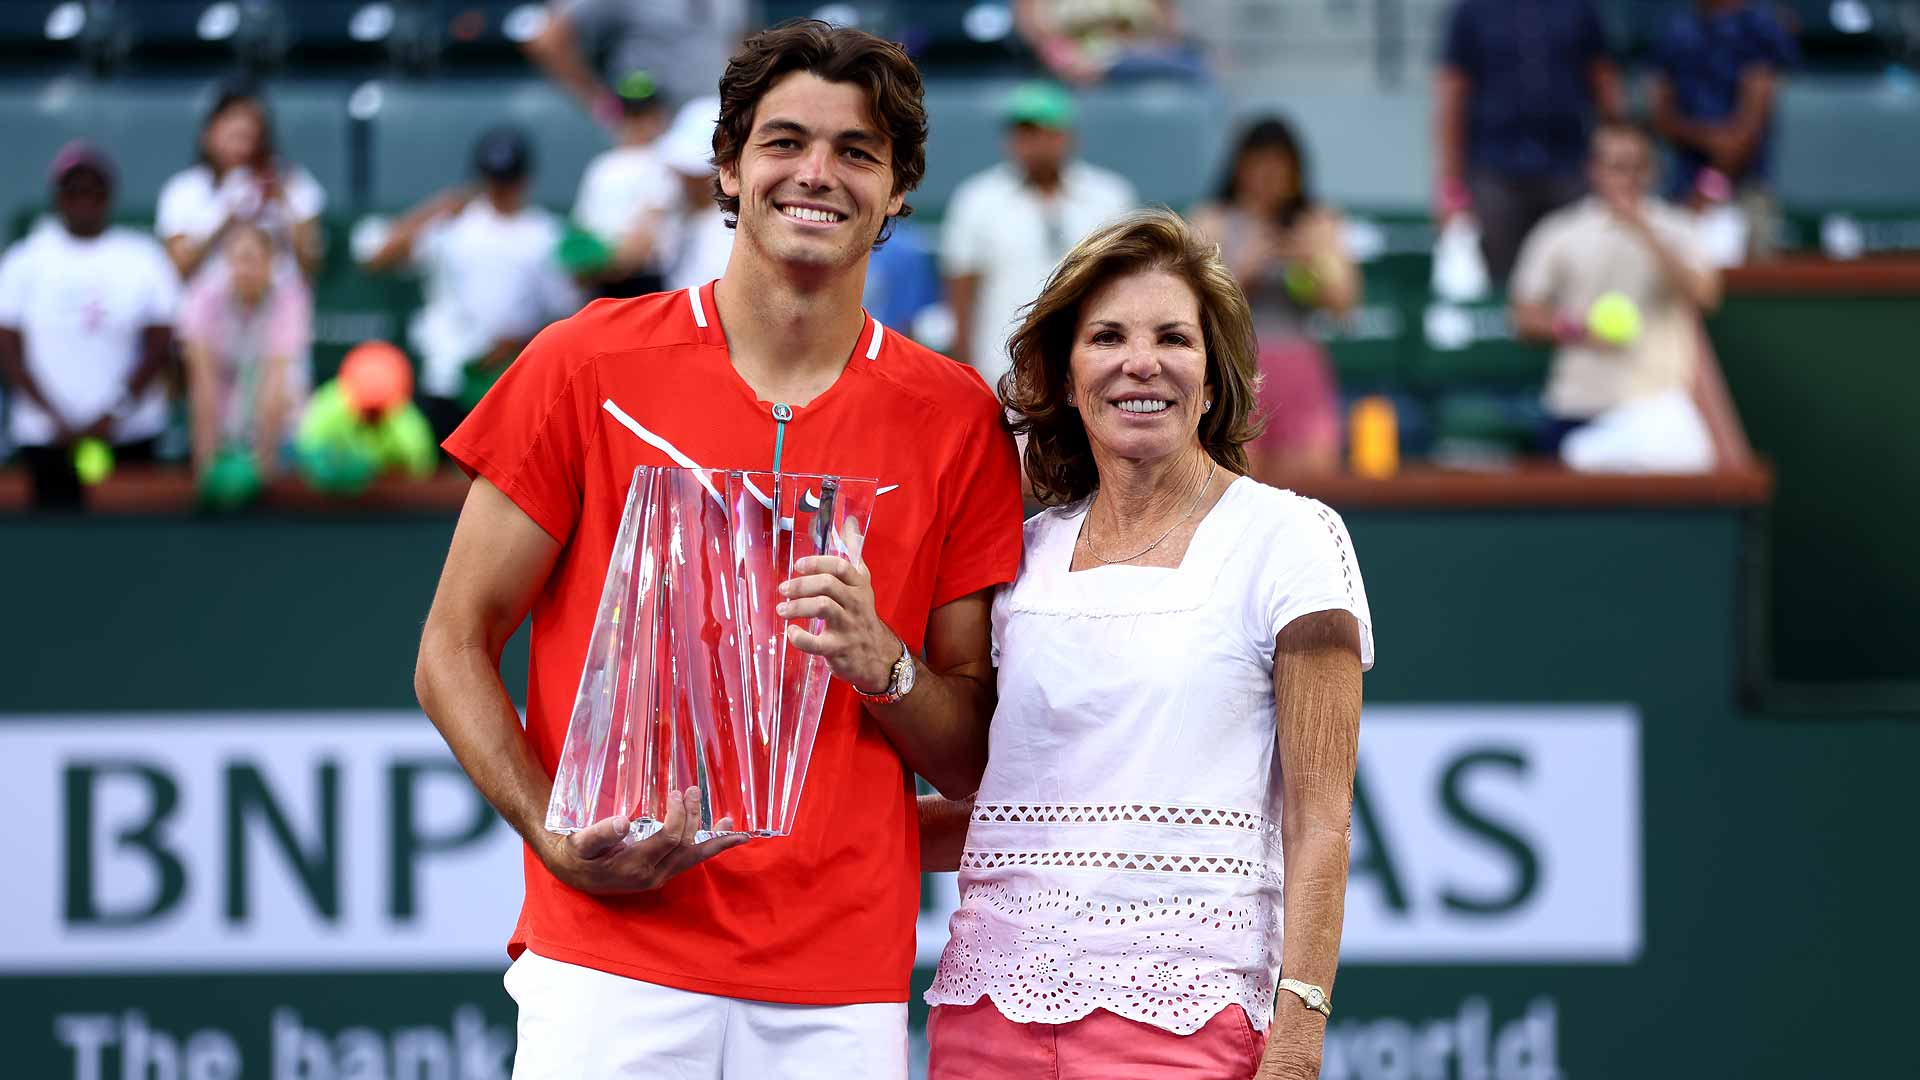 LIVE RANKINGS. Taylor Fritz to be the American no.1 after Indian